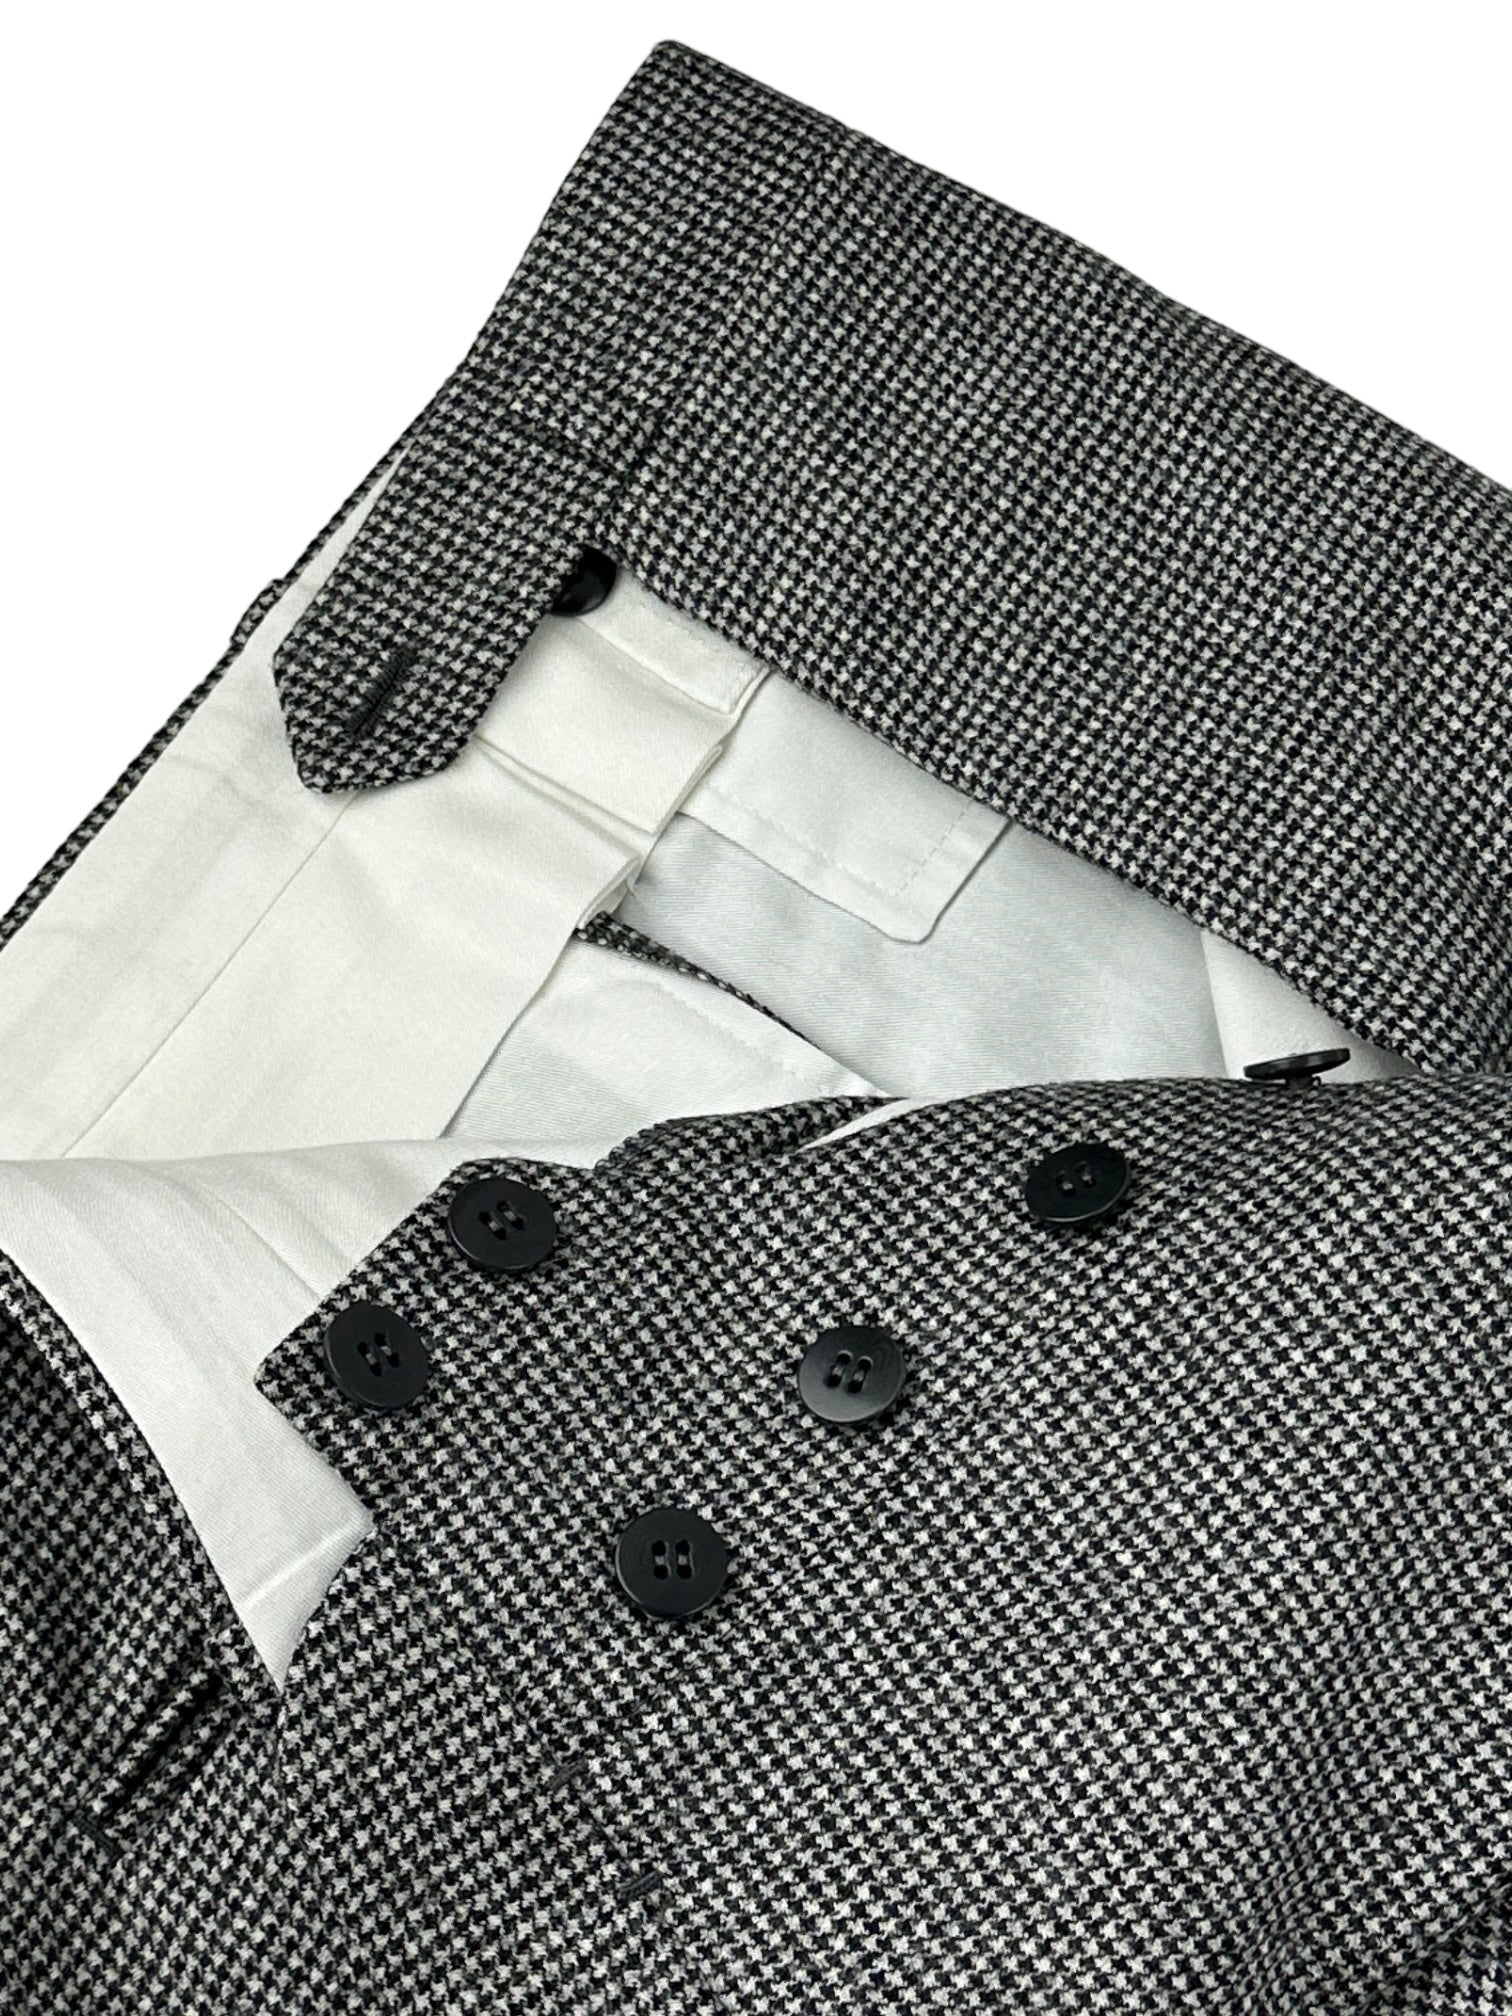 Cesare Attolini Black and White Wool & Cashmere Puppytooth Suit